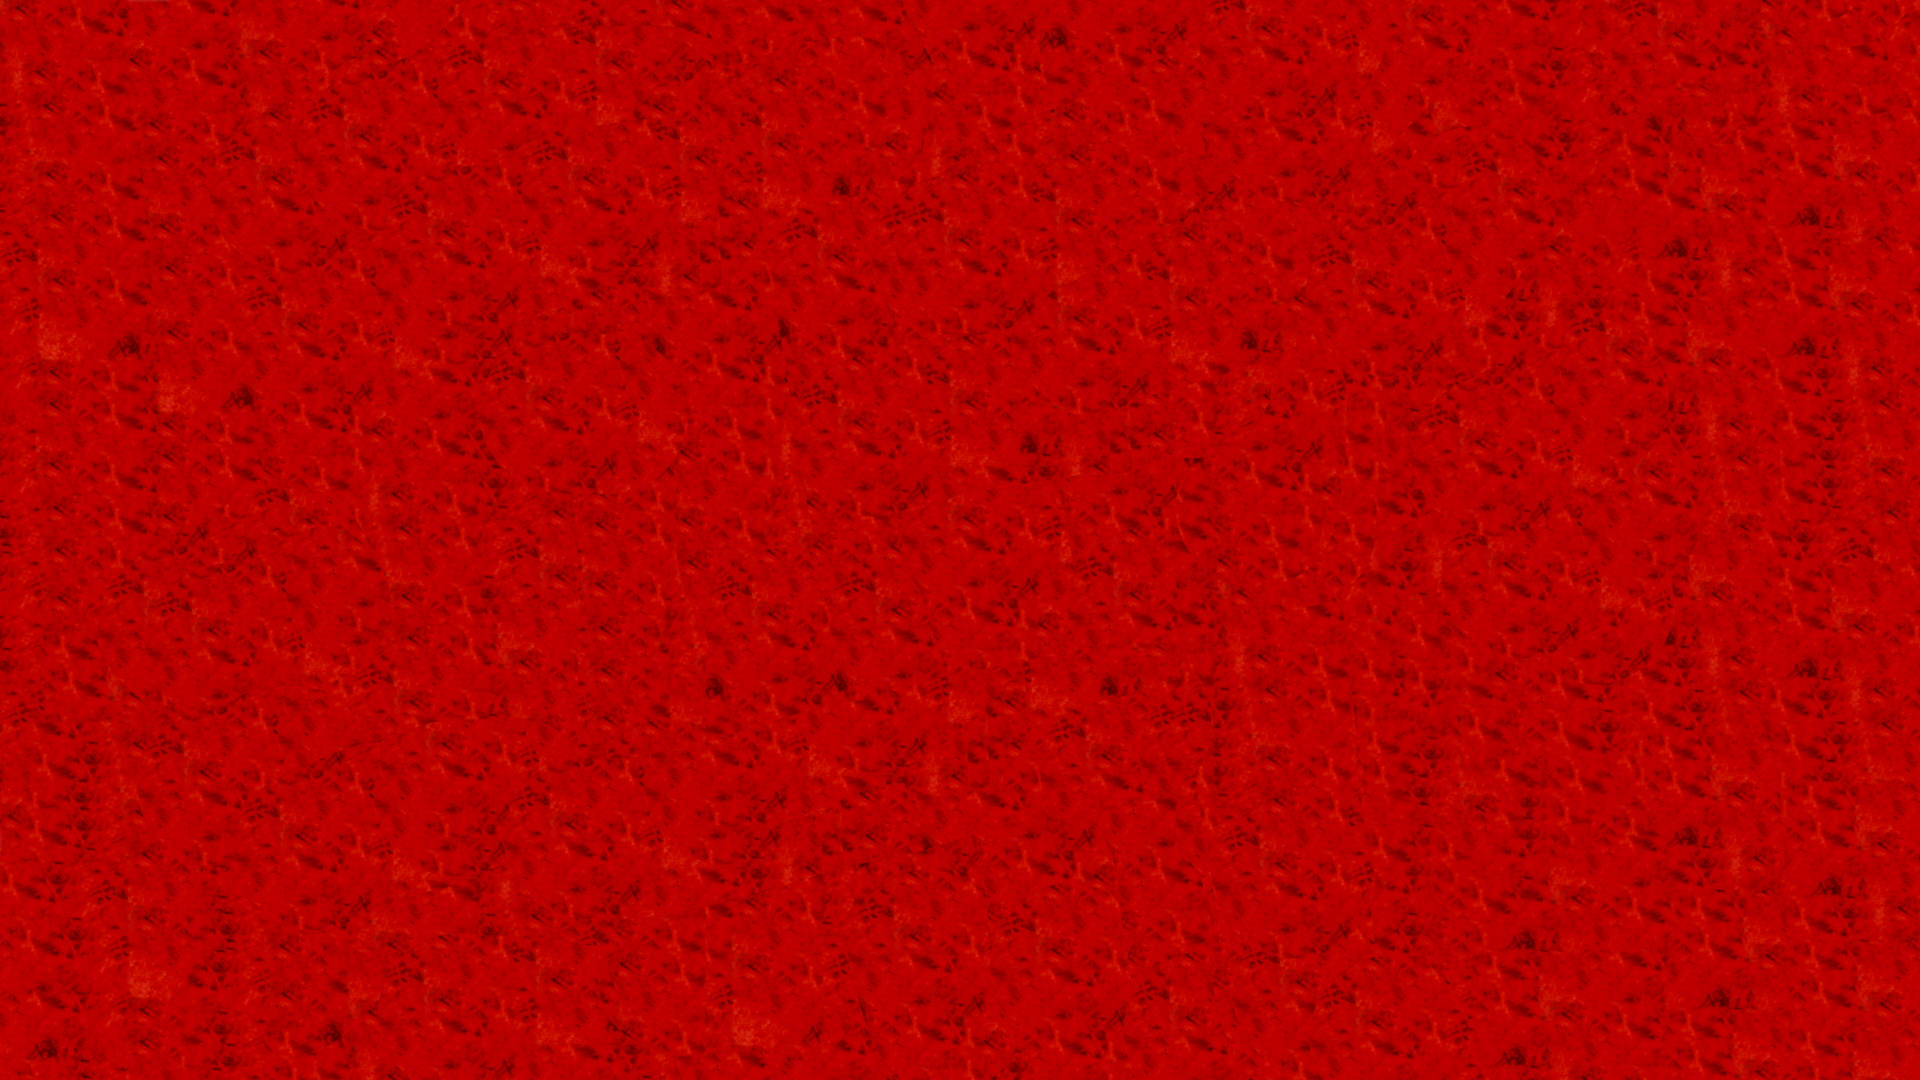 Simple Hd Rough Red Background